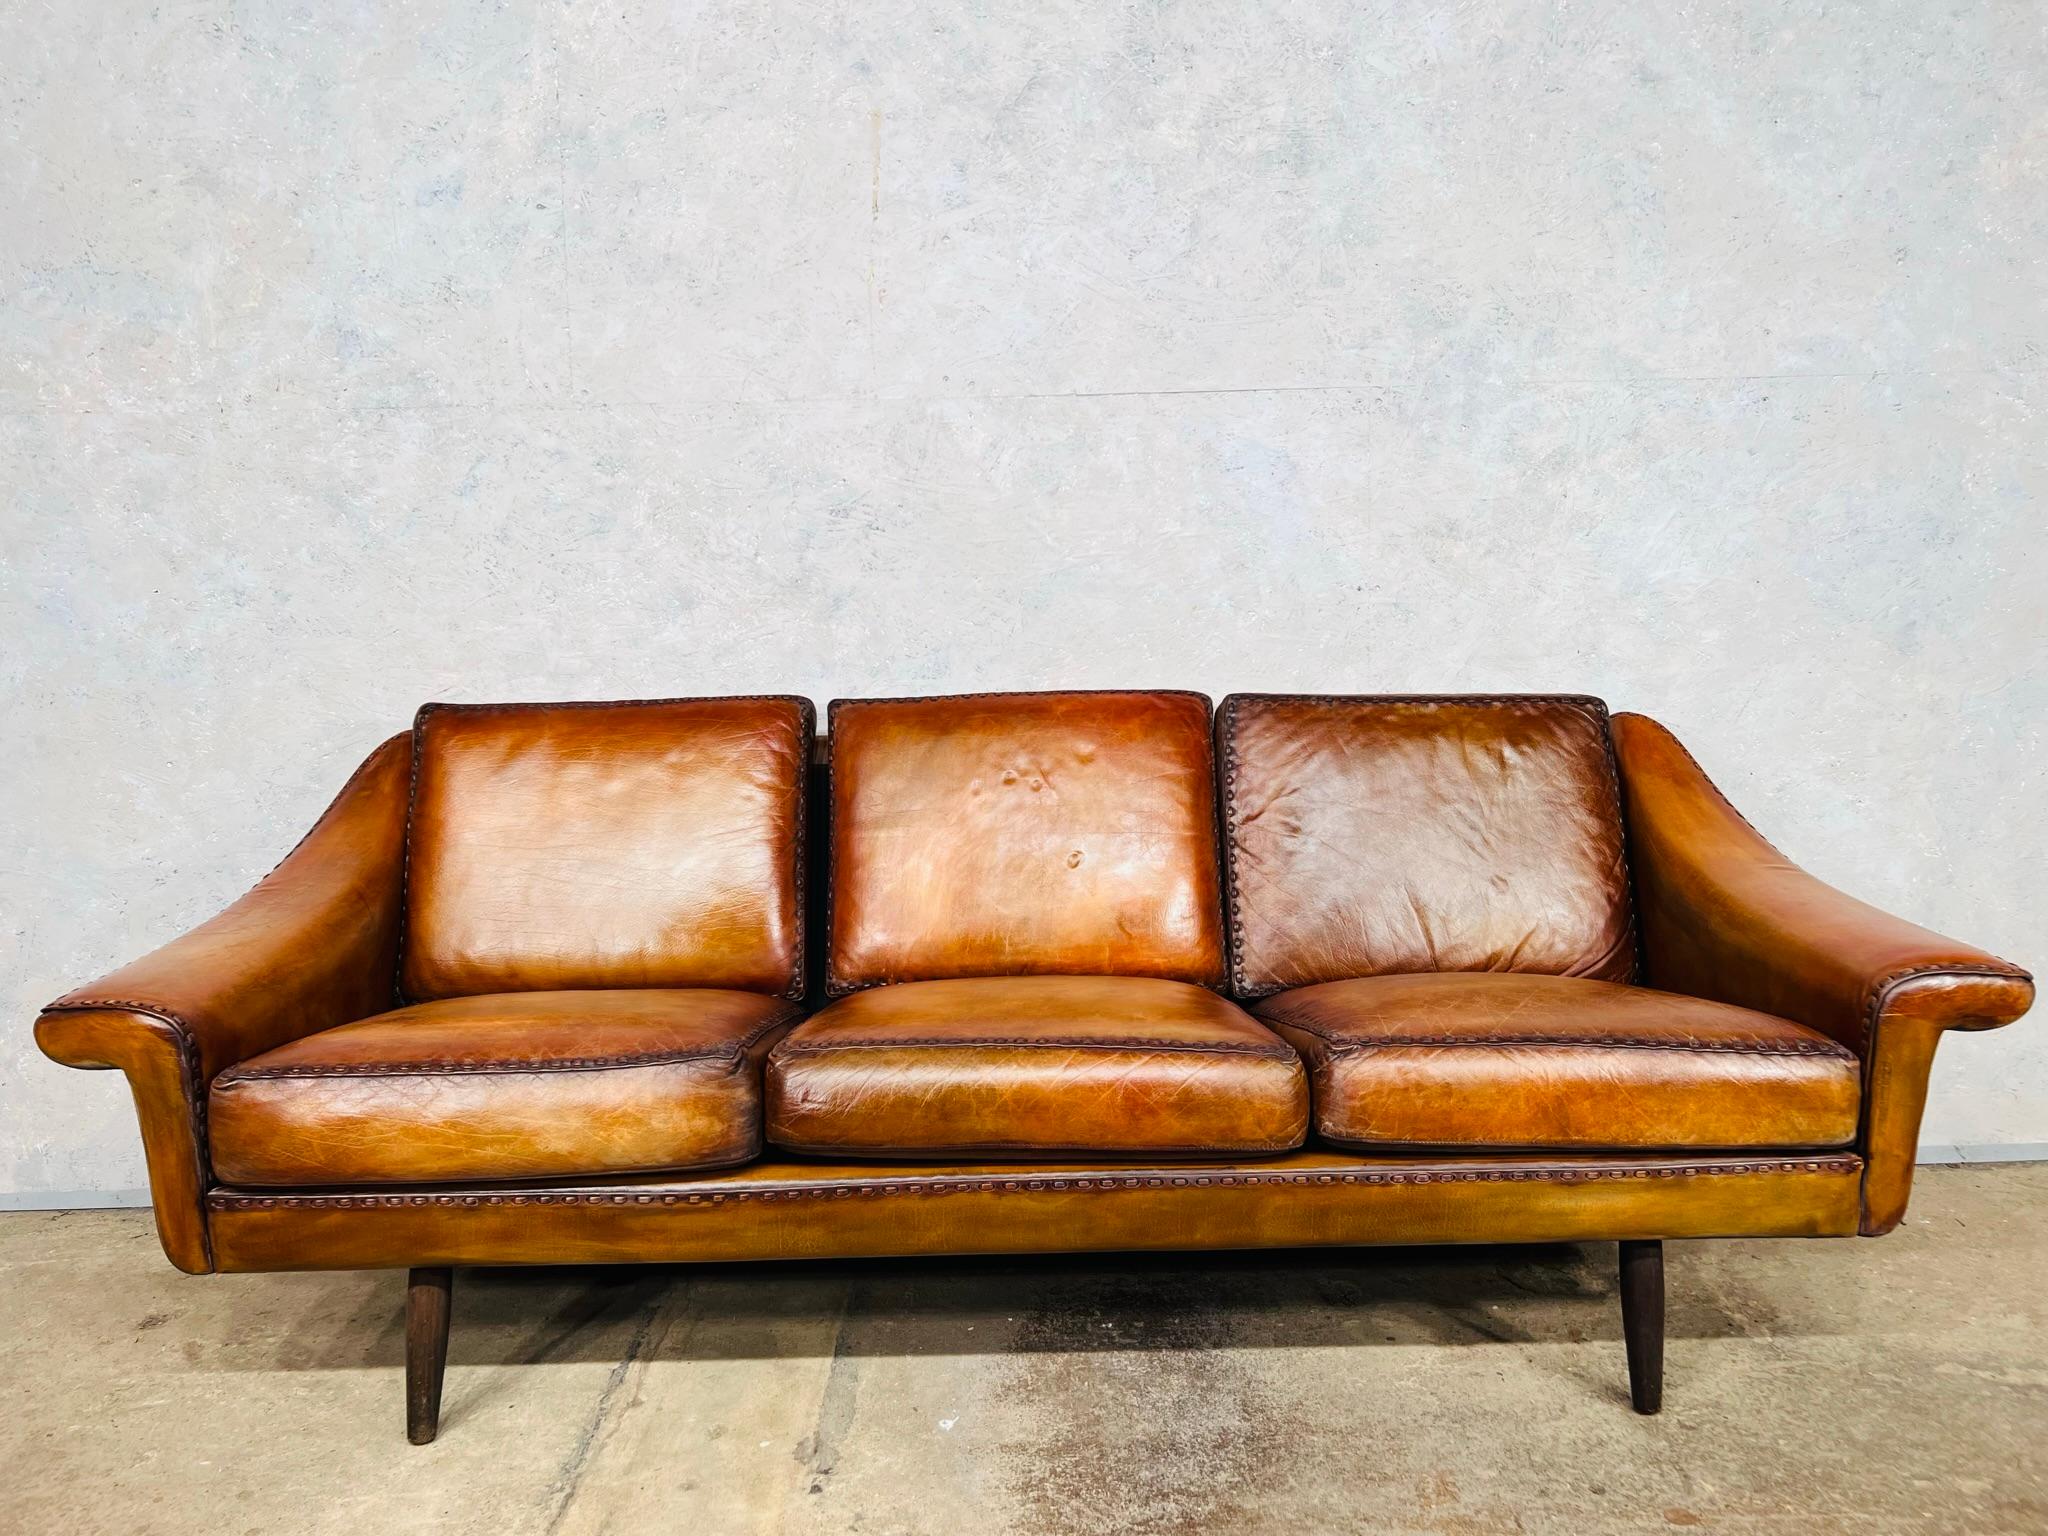 Matador Leather 3 Seater Sofa by Aage Christiansen for Eran 1960s #642 For Sale 5